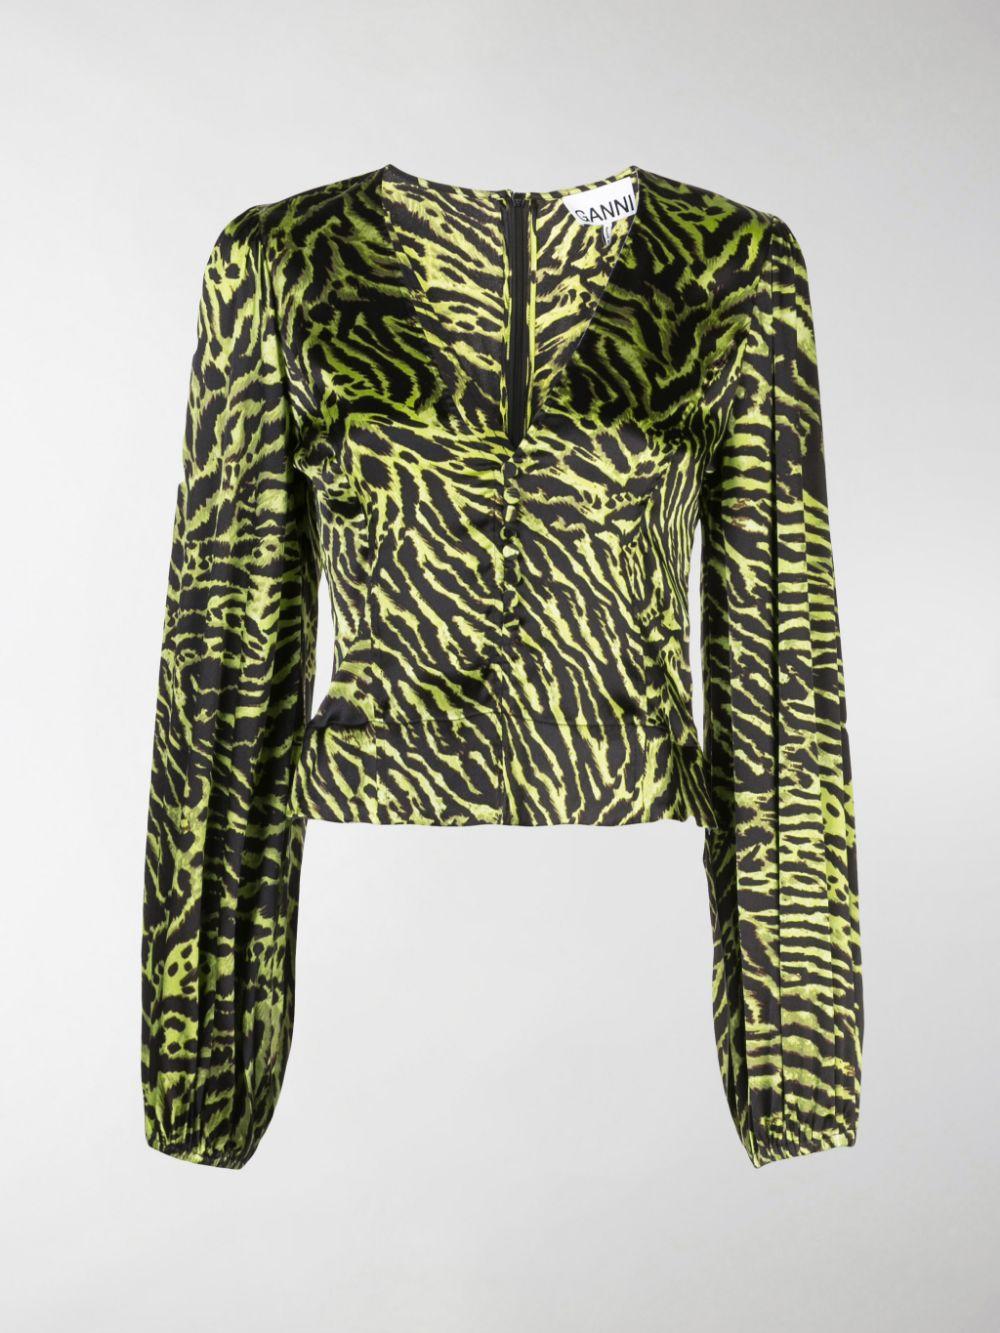 Ganni Tiger Print Blouse in Green - Save 26% - Lyst